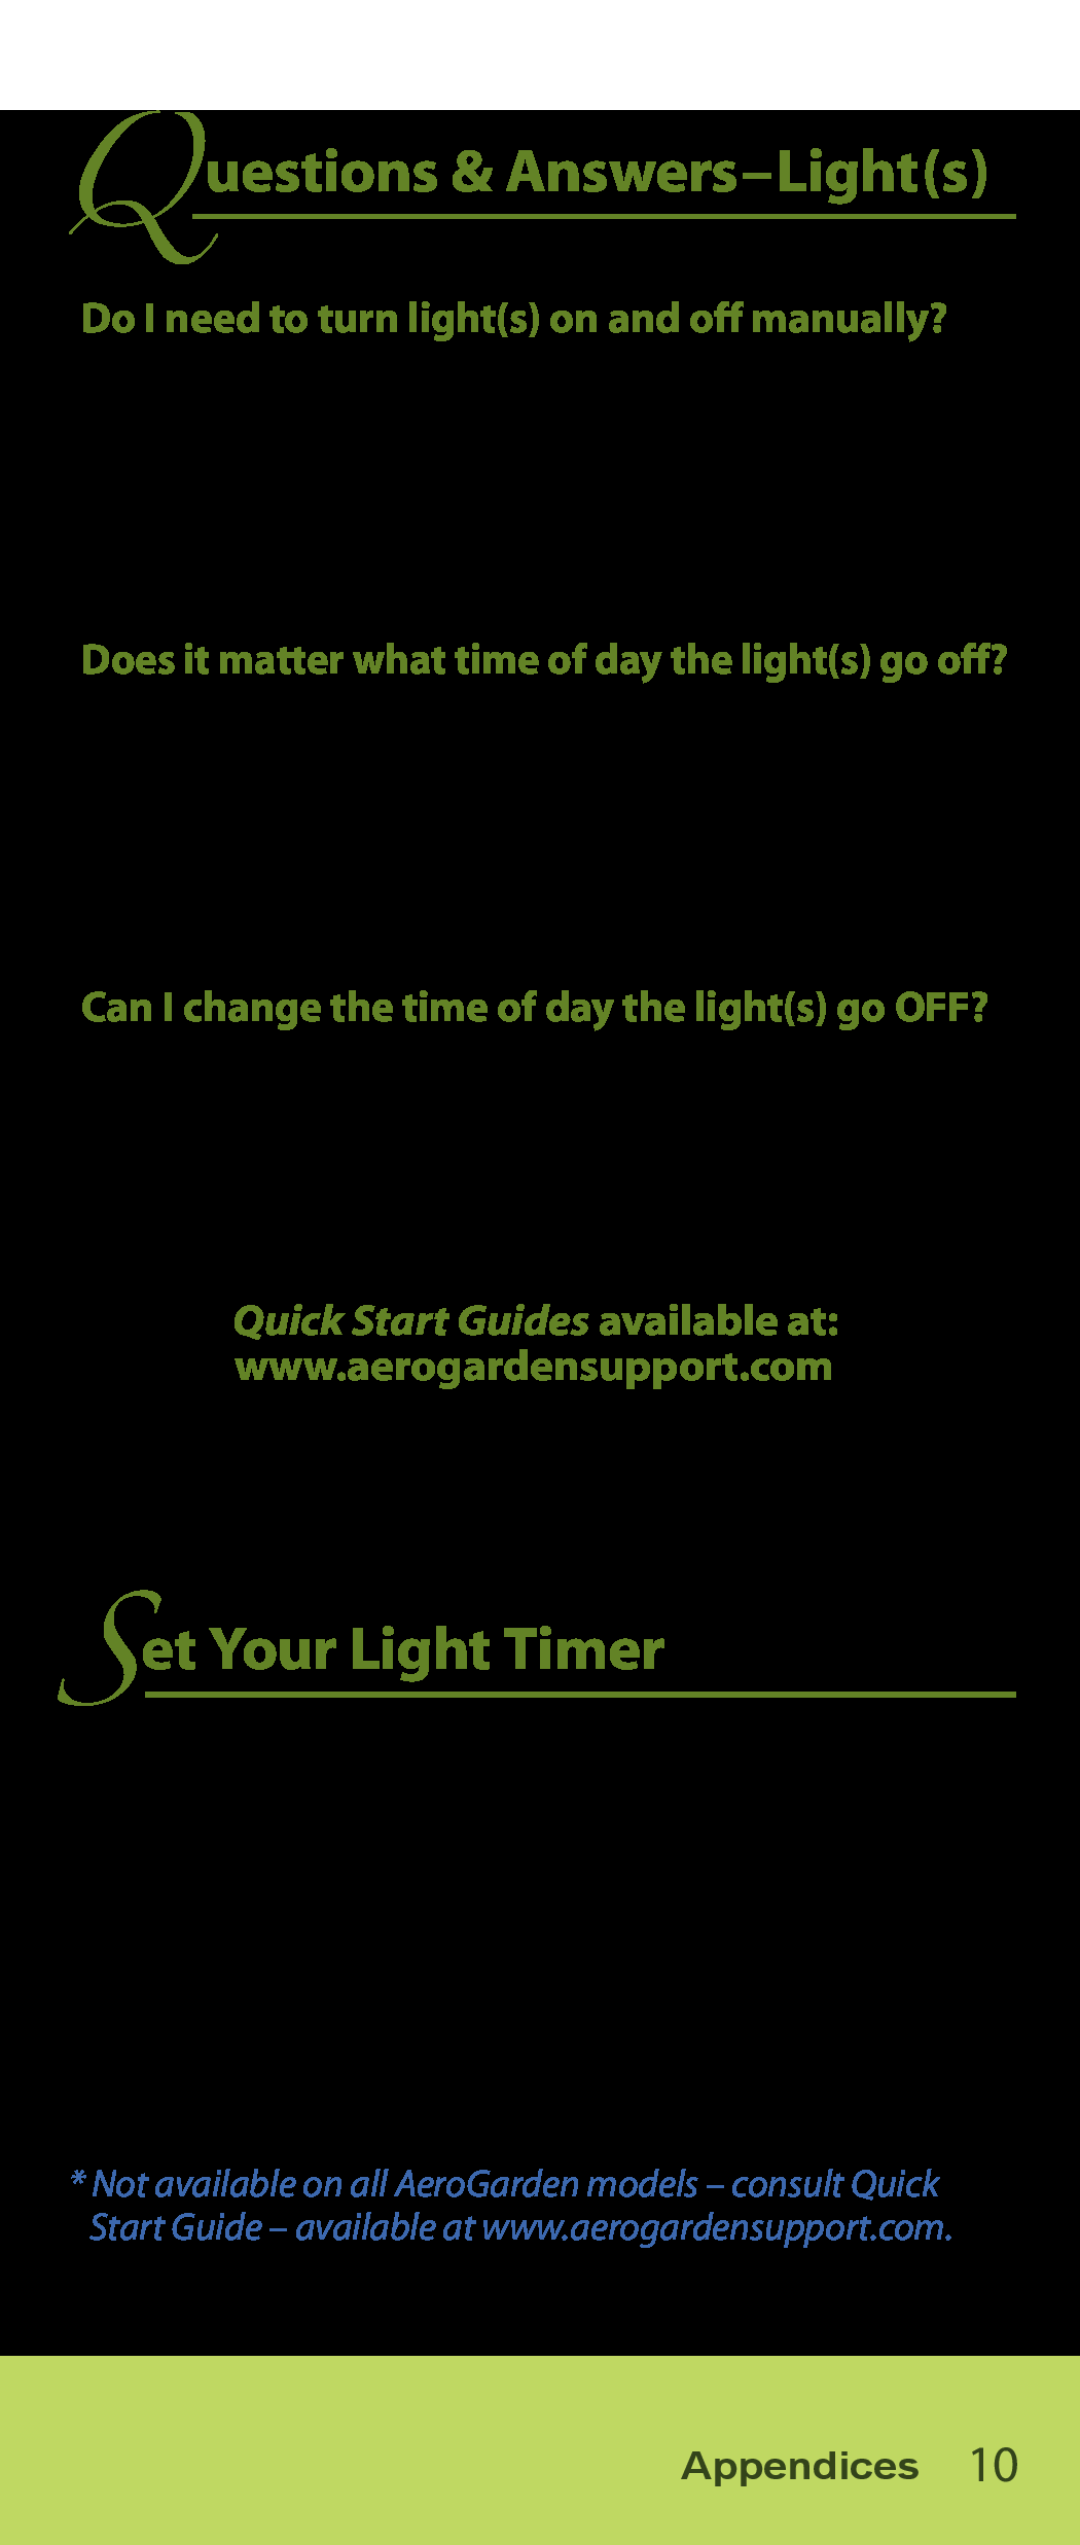 AeroGarden Salad Series Questions & Answers-Lights, Set Your Light Timer, Do I need to turn lights on and off manually? 